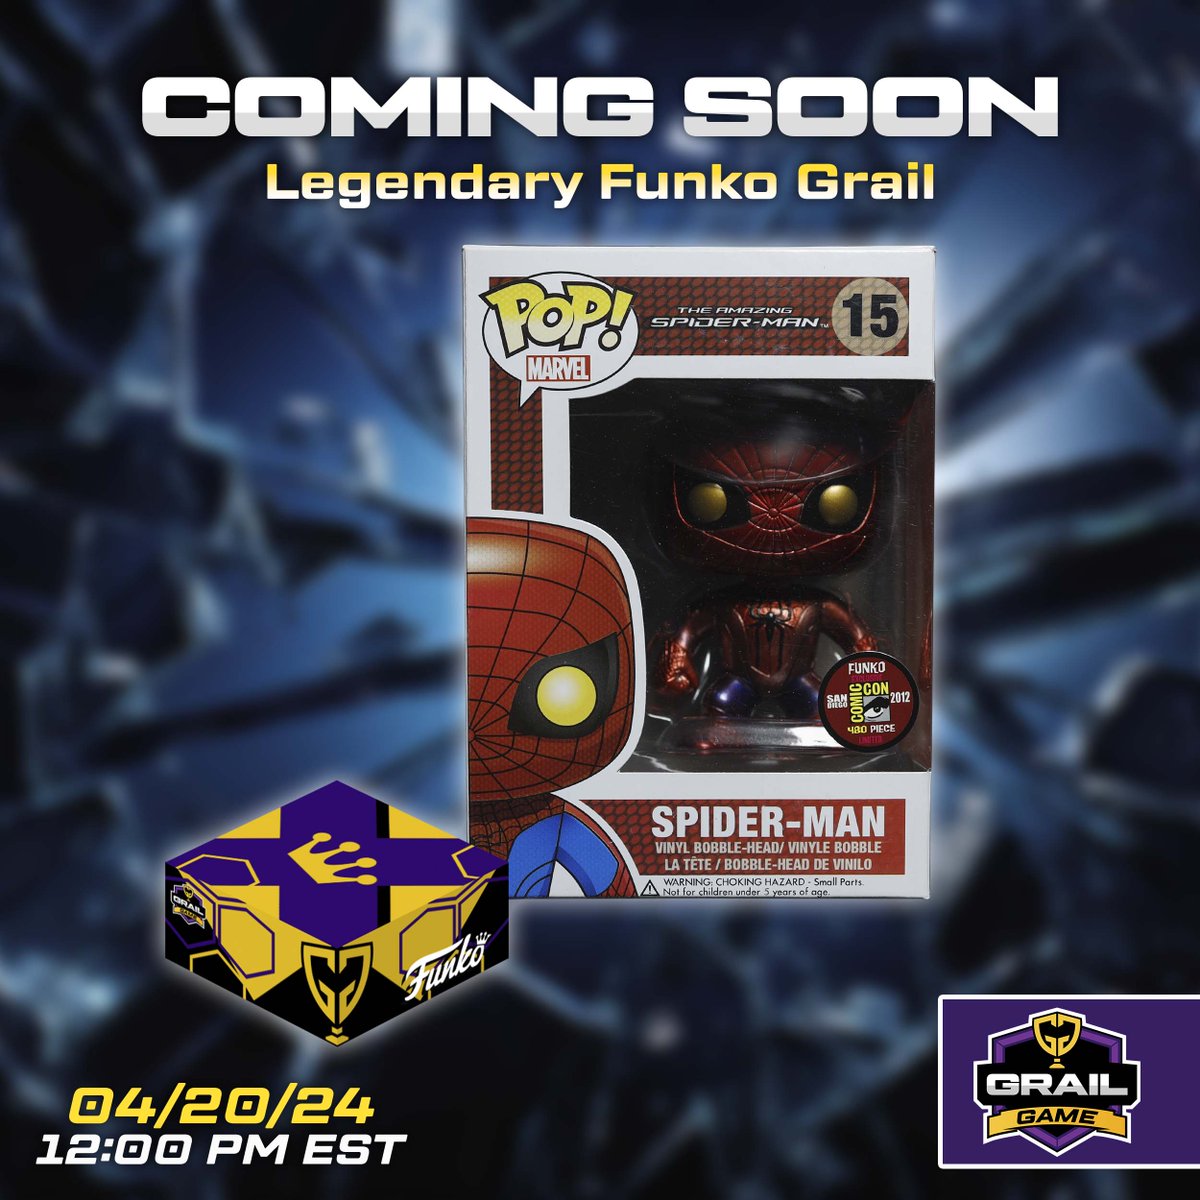 #GrailGamers! #FunkoFans! ARE YOU READY?! 💥 Our Newest Game Legendary Funko Grail #MysteryBox Game is Launching 04/20/24 - 12:00PM EST! 📌 That's right, we have a #MEGAGRAIL as the TOP HIT! The Amazing Spider-Man (Metallic Golden Eyes) 2012 SDCC 🏆 With a PPG Over $3k! 😱 This